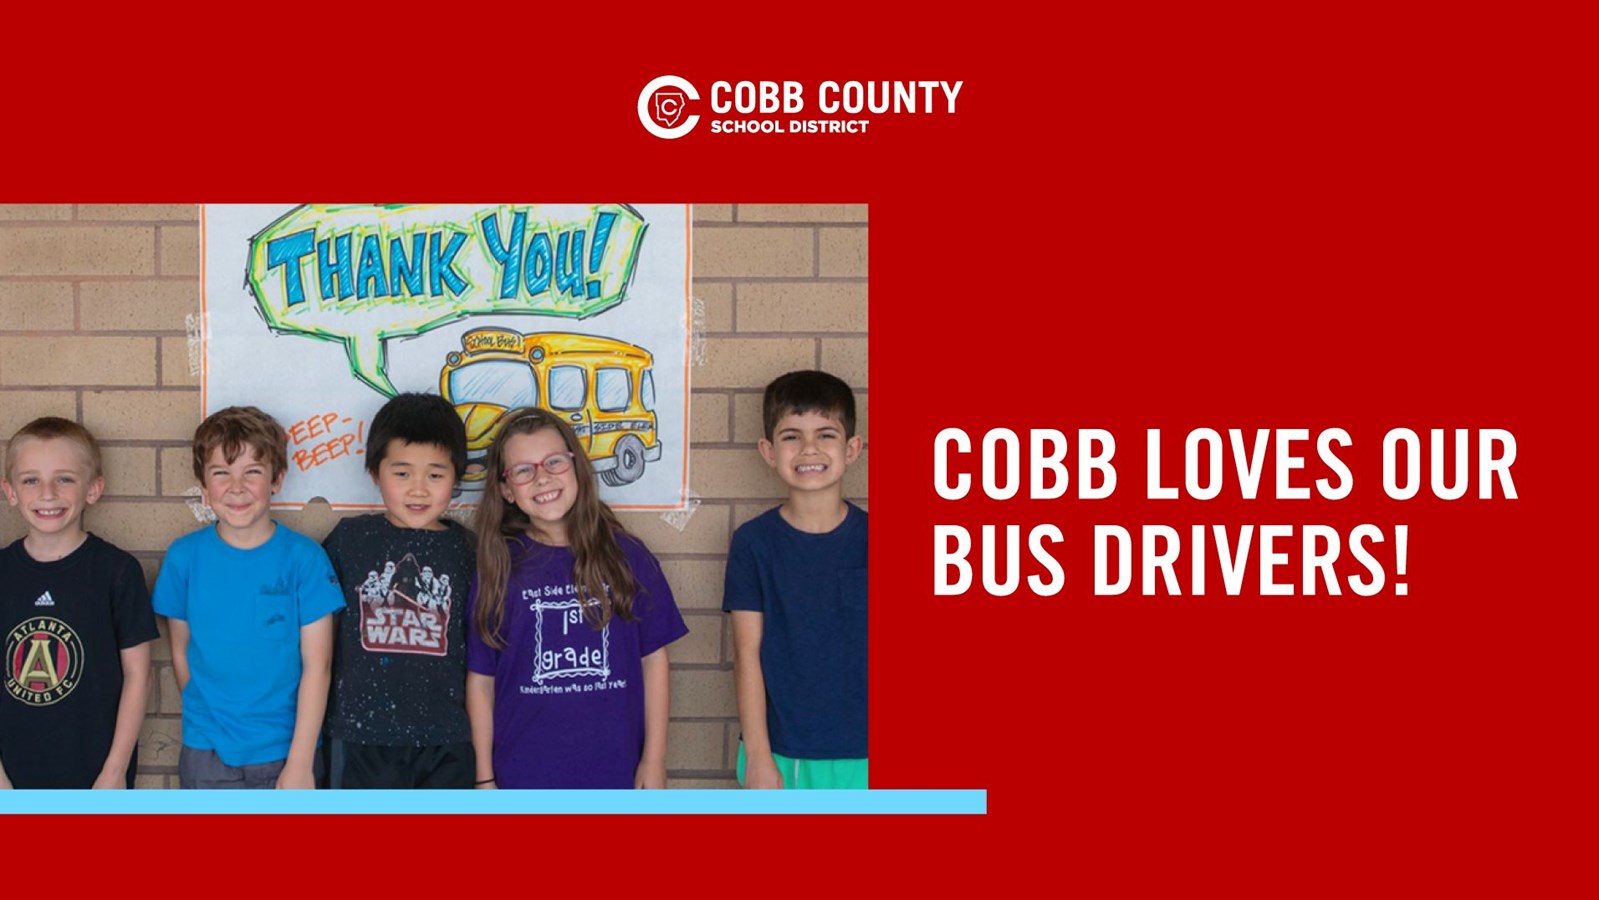 In Cobb, We Love Our Bus Drivers!